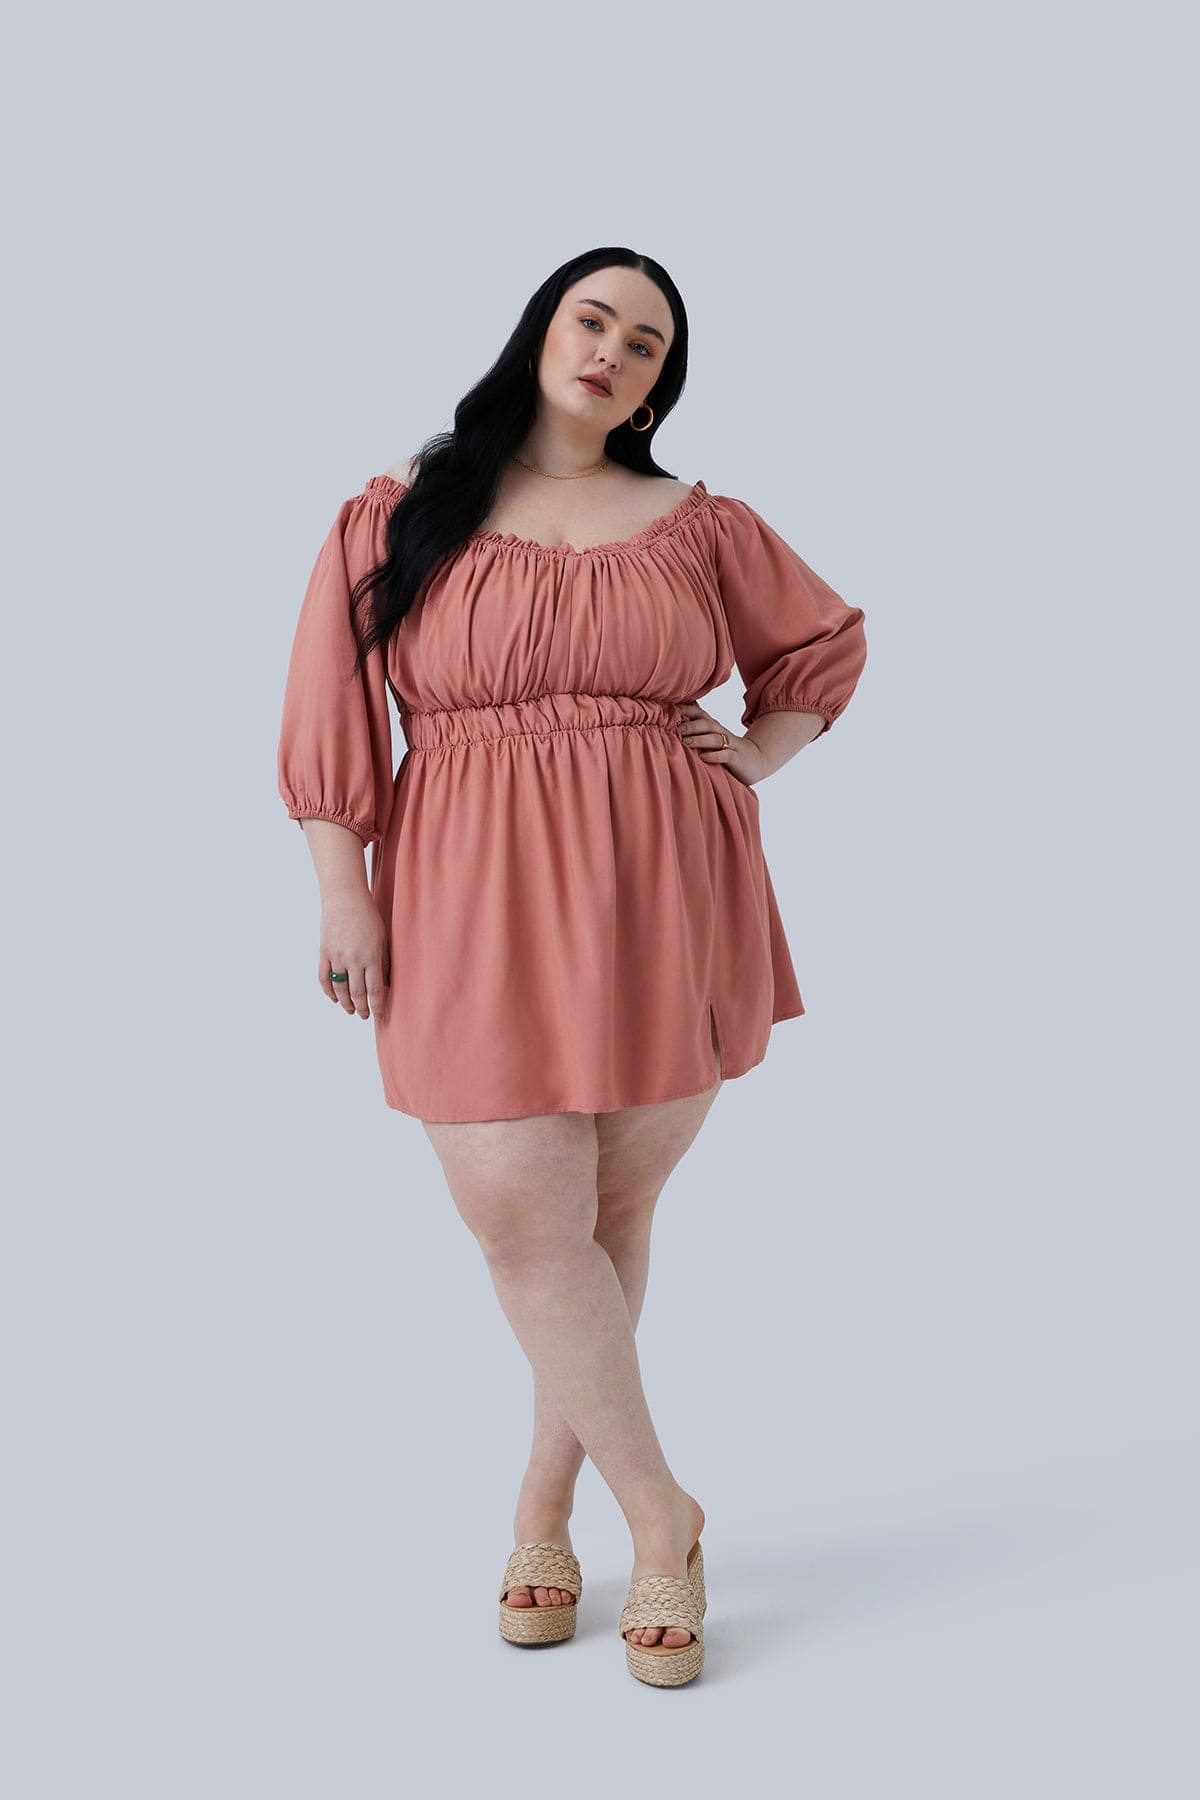 Model standing with one hand on hip and legs crossed wearing the Gianna Mini Dress in blush from Gia IRL Plus Size Boutique in a size 3X. Ruched Off the Shoulder Mini Dress with Ruffle Detail, Blouson Sleeve, and Slit.